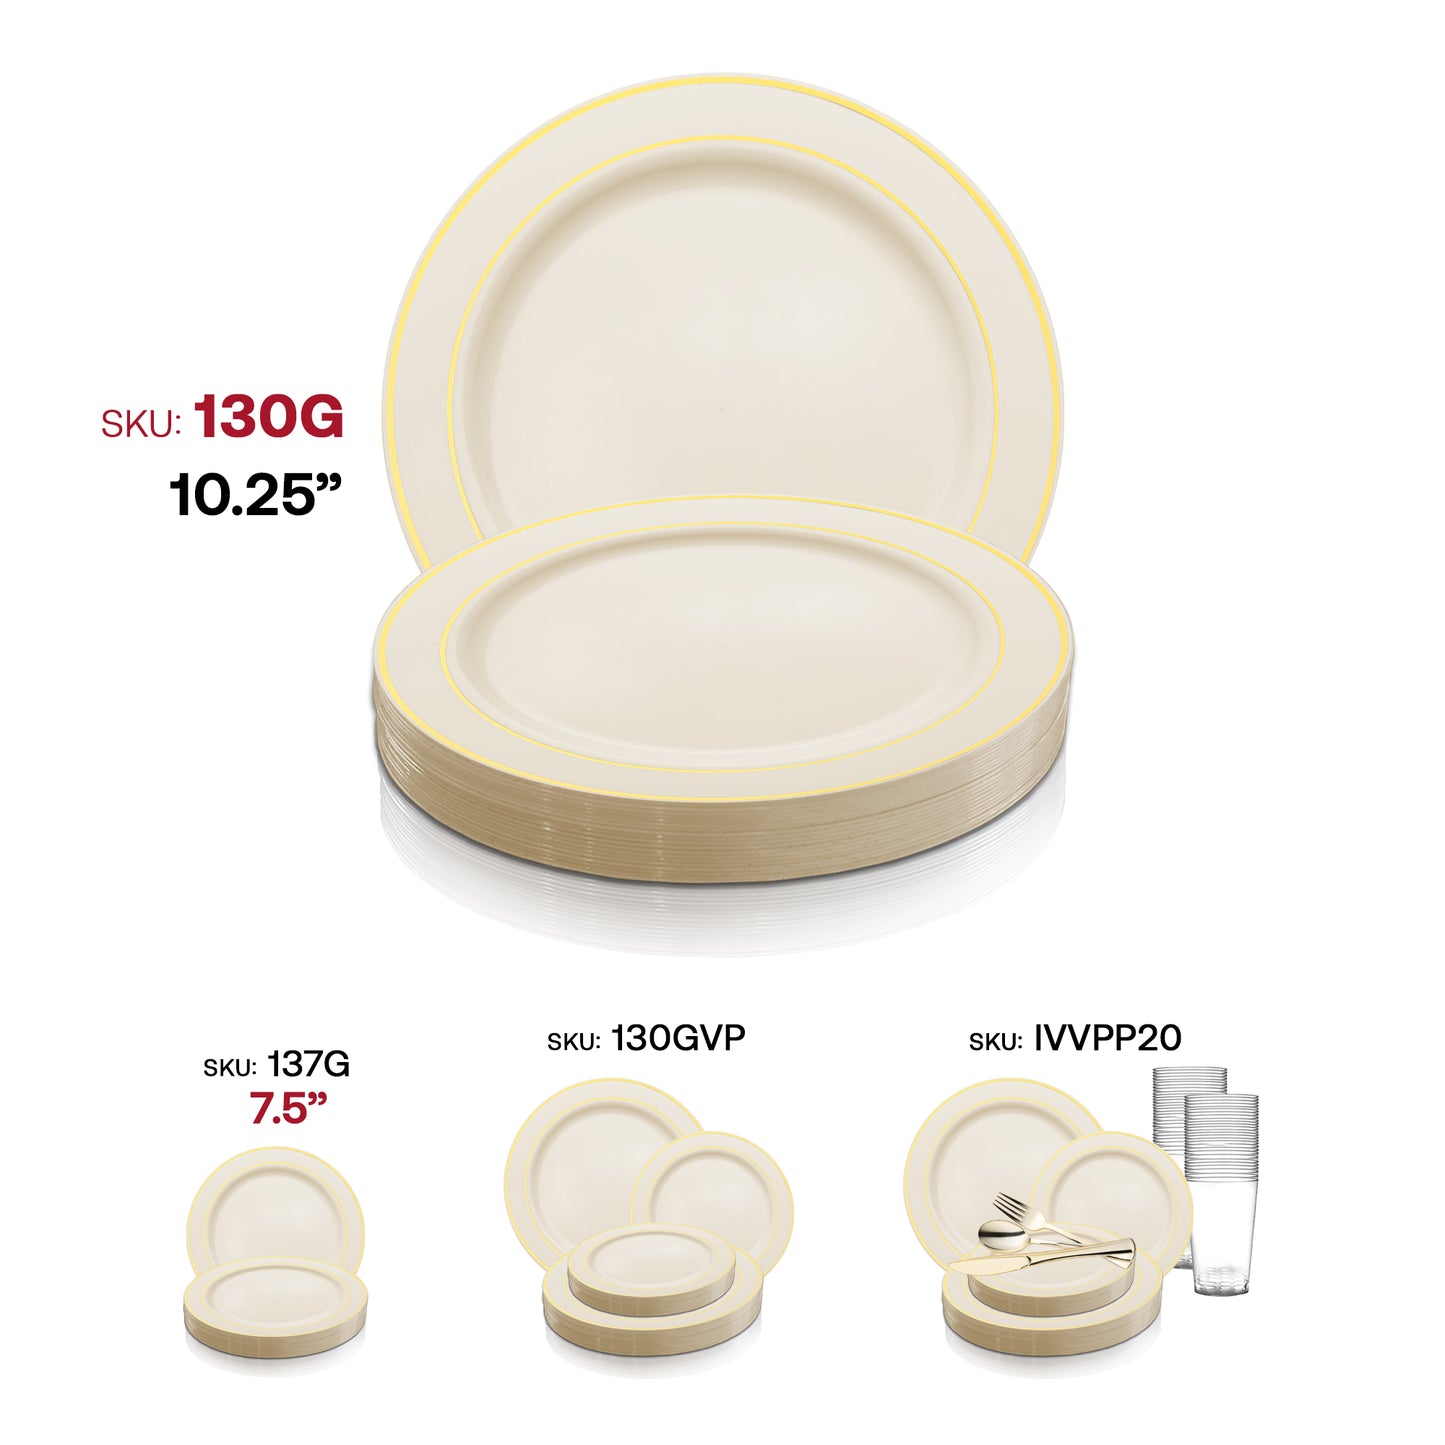 Ivory with Gold Edge Rim Plastic Dinner Plates (10.25") SKU | The Kaya Collection